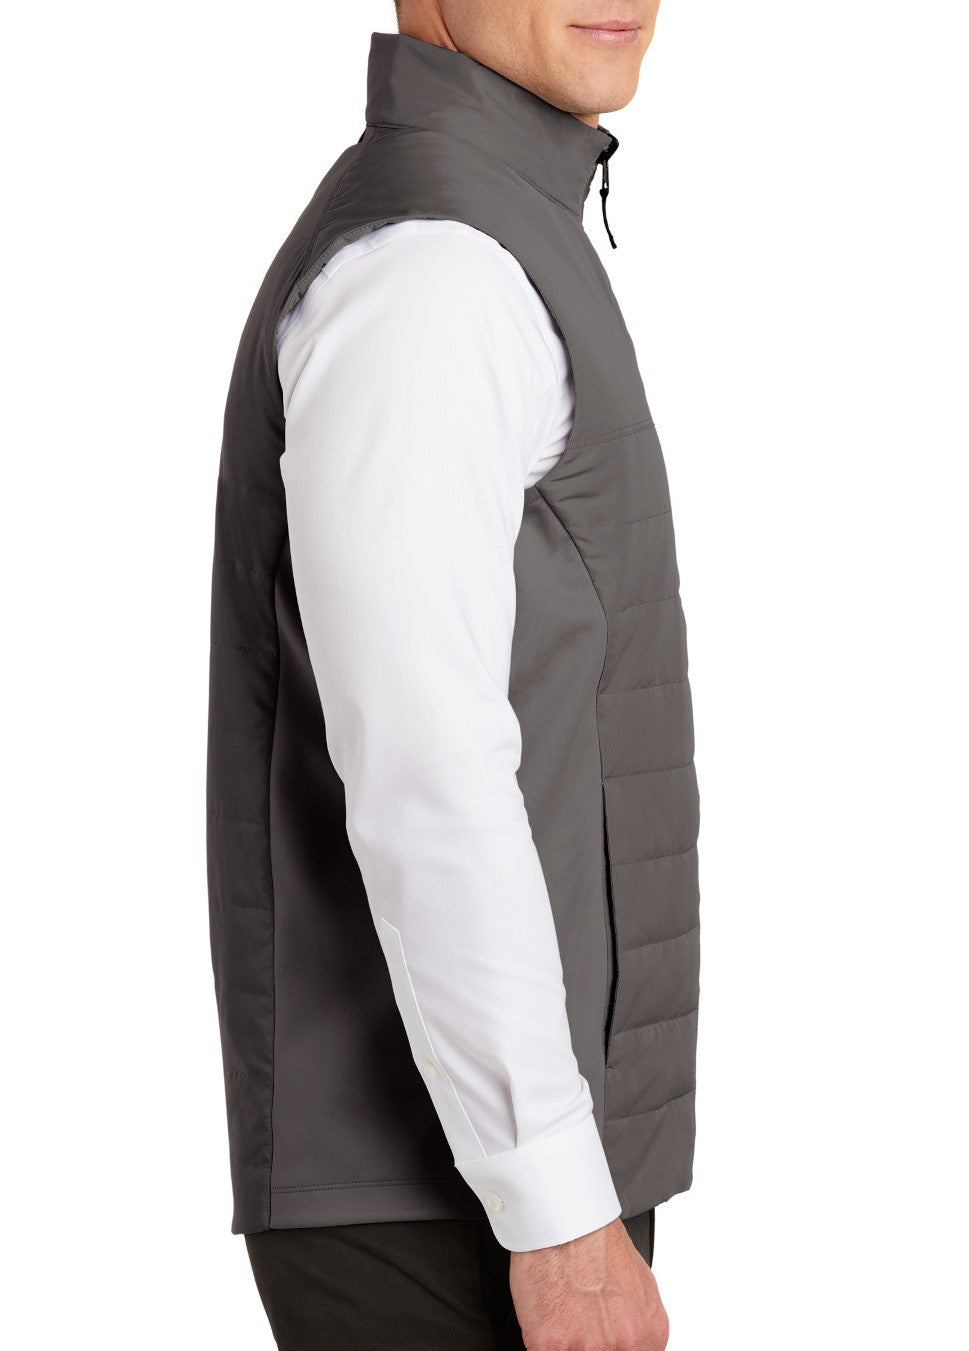 Graphite Feather Lite vest by Flying R Ranchwear